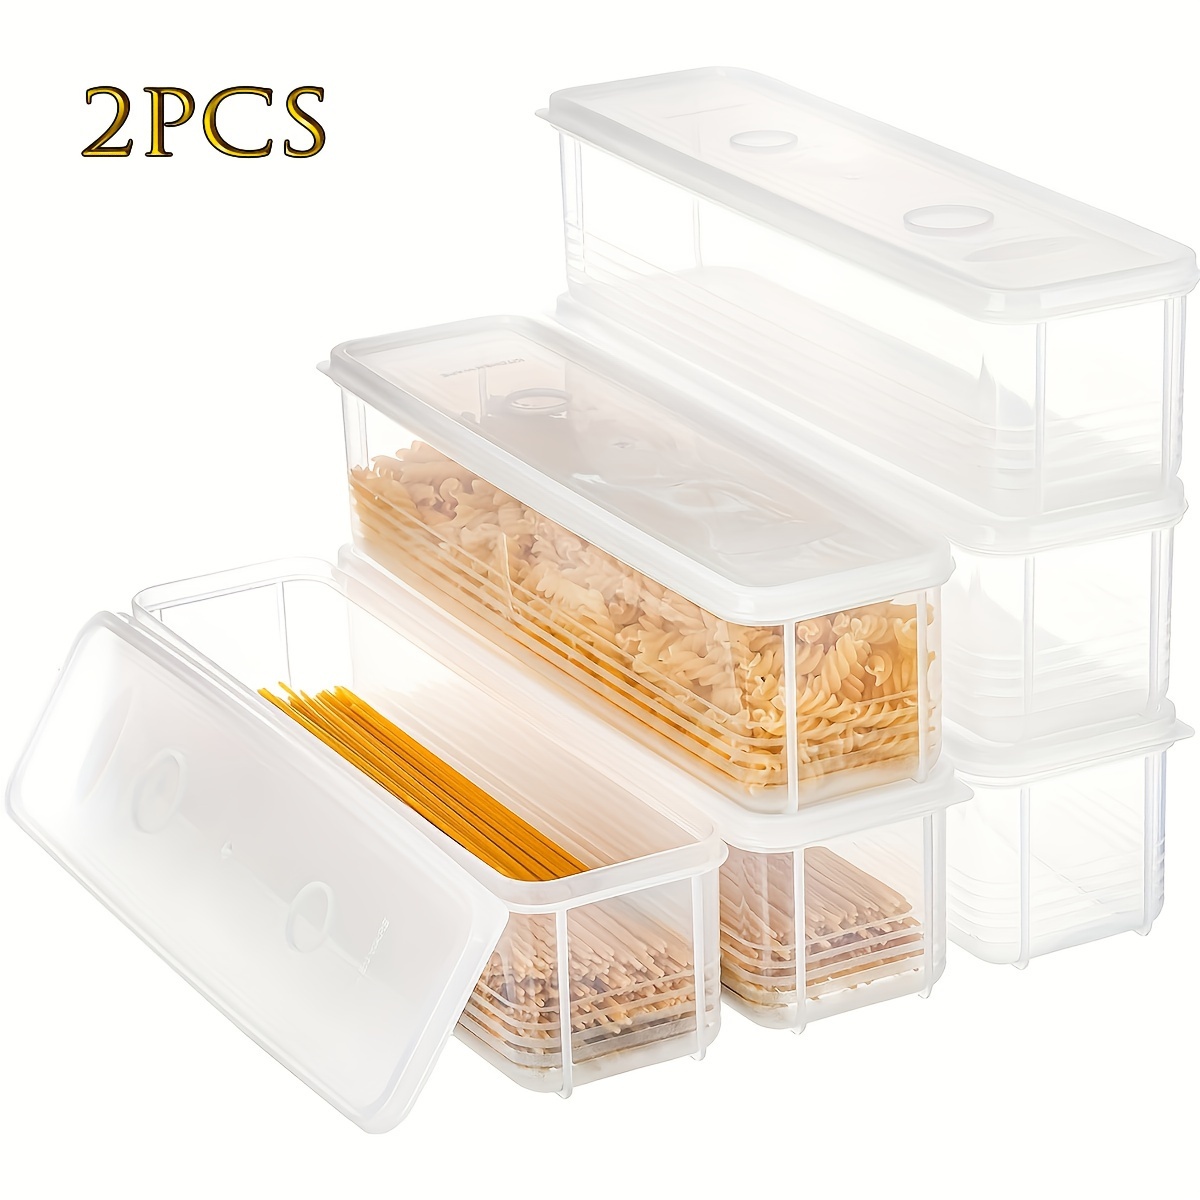 Reusable Pizza Storage Container with Microwavable Serving Trays -  Adjustable Pizza Slice Container to Organize & Save Space - BPA Free,  Microwave, 